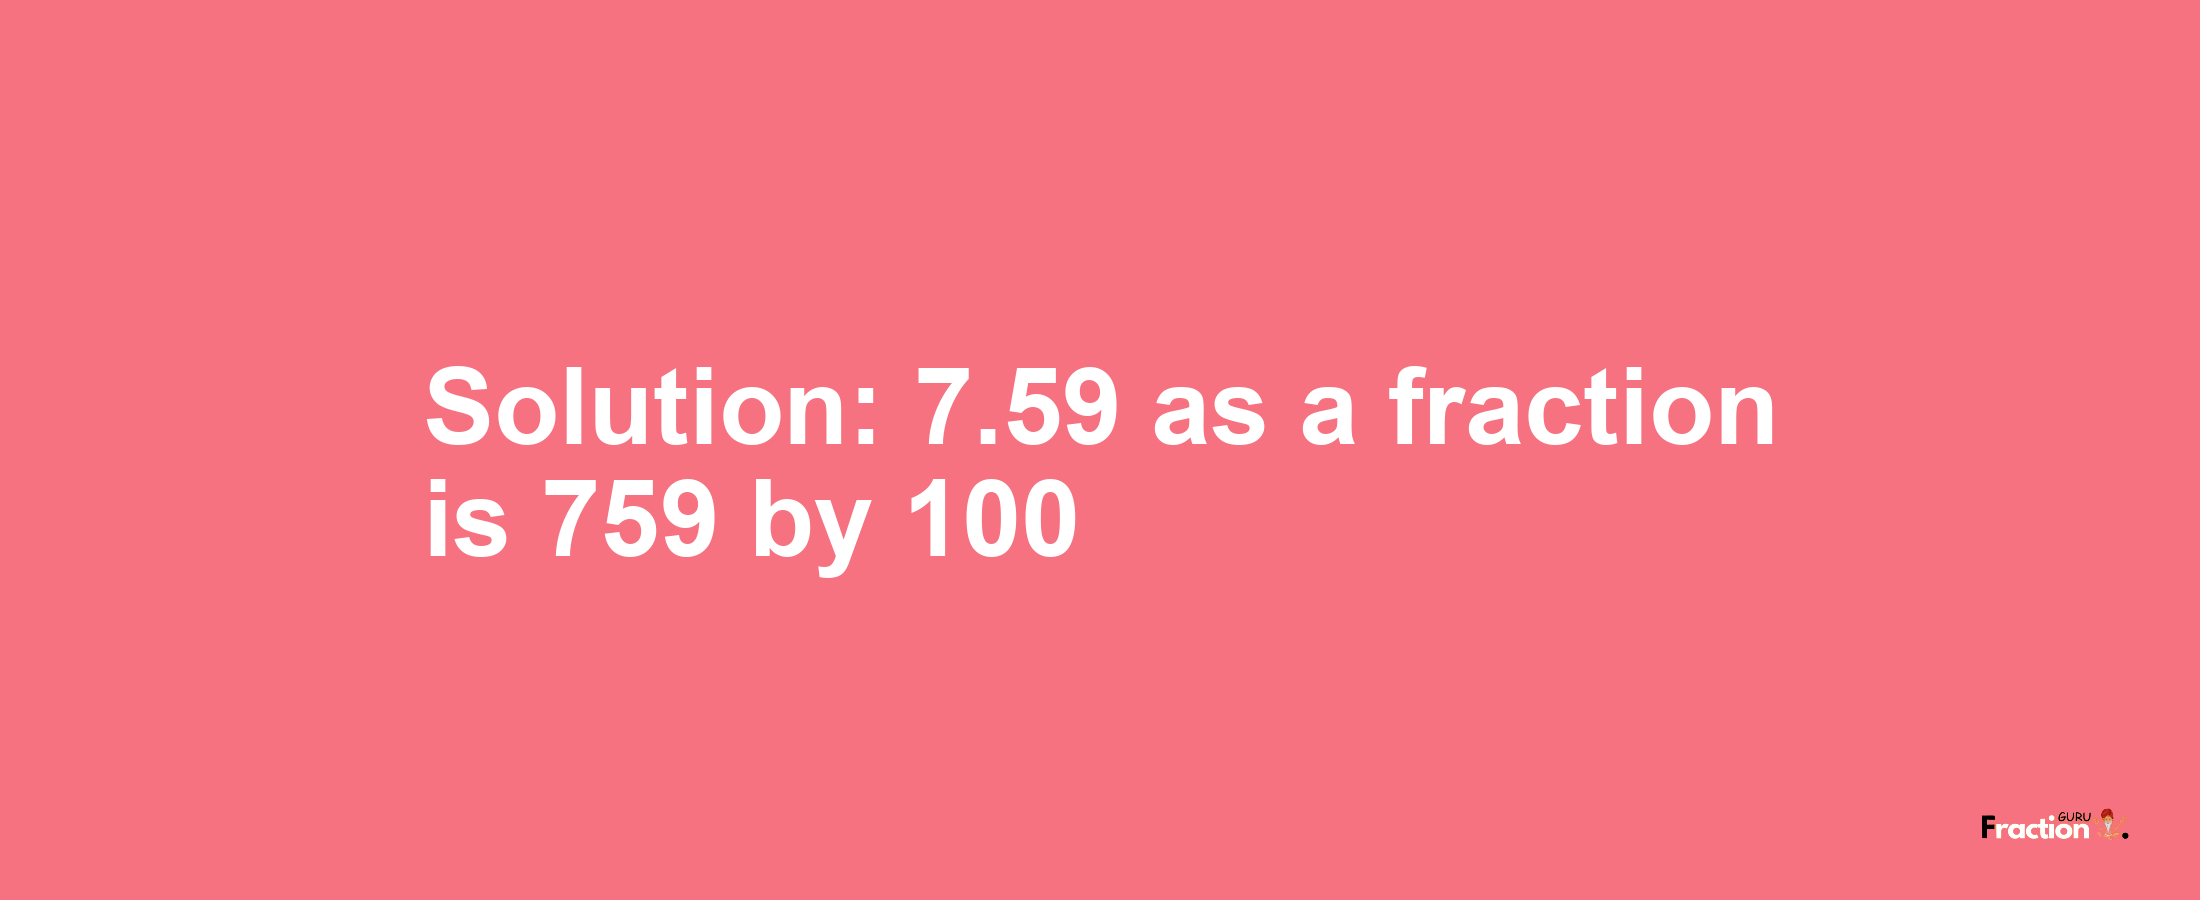 Solution:7.59 as a fraction is 759/100